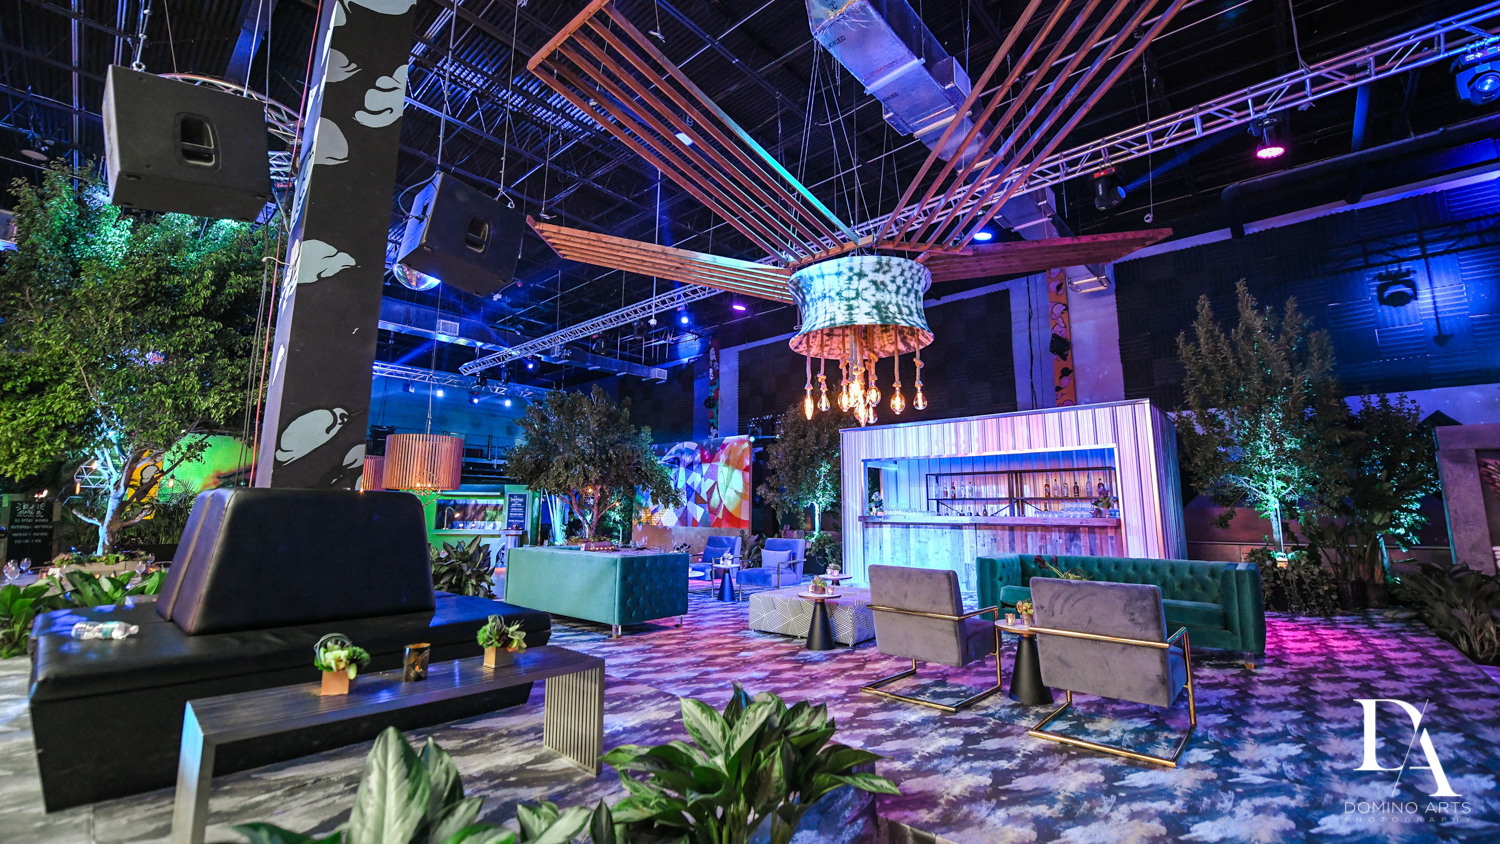 amazing decor at Urban Graffiti BNai Mitzvah with celebrity Shaq at Xtreme Action Park by Domino Arts Photography